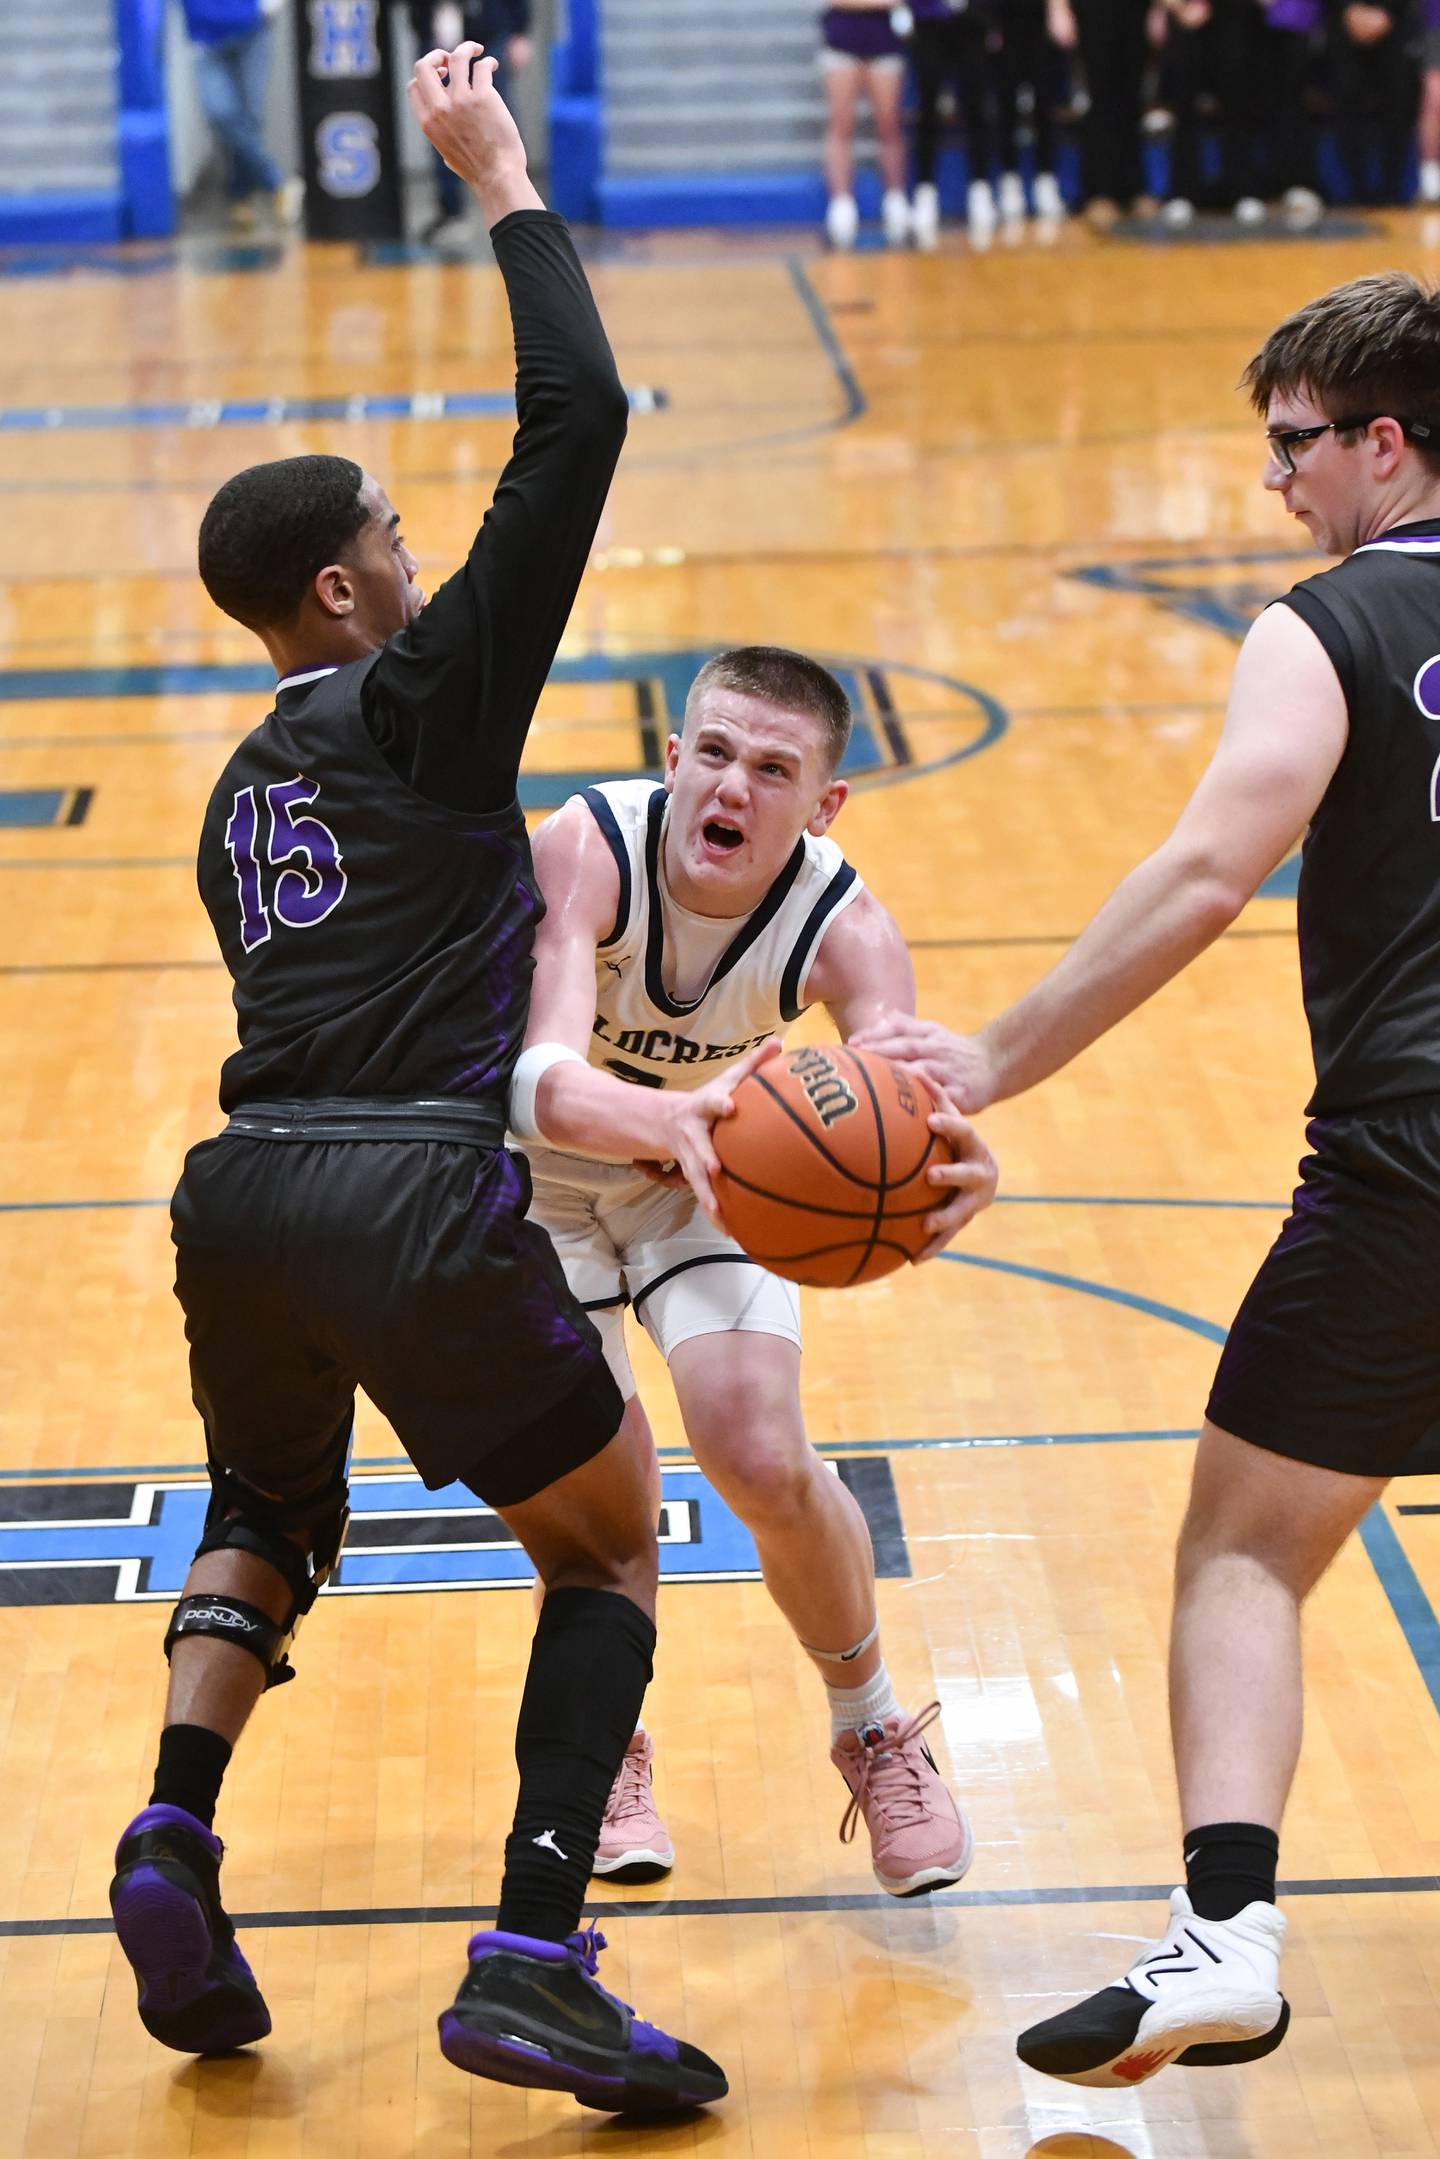 Fieldcrest's Ed Lorton draws a foul as he manuevers to the basket under pressure from two Manteno defenders Tuesday during the Knights' 53-37 victory over Manteno in the IHSA Class 2A Clifton Central Sectional semifinal game.